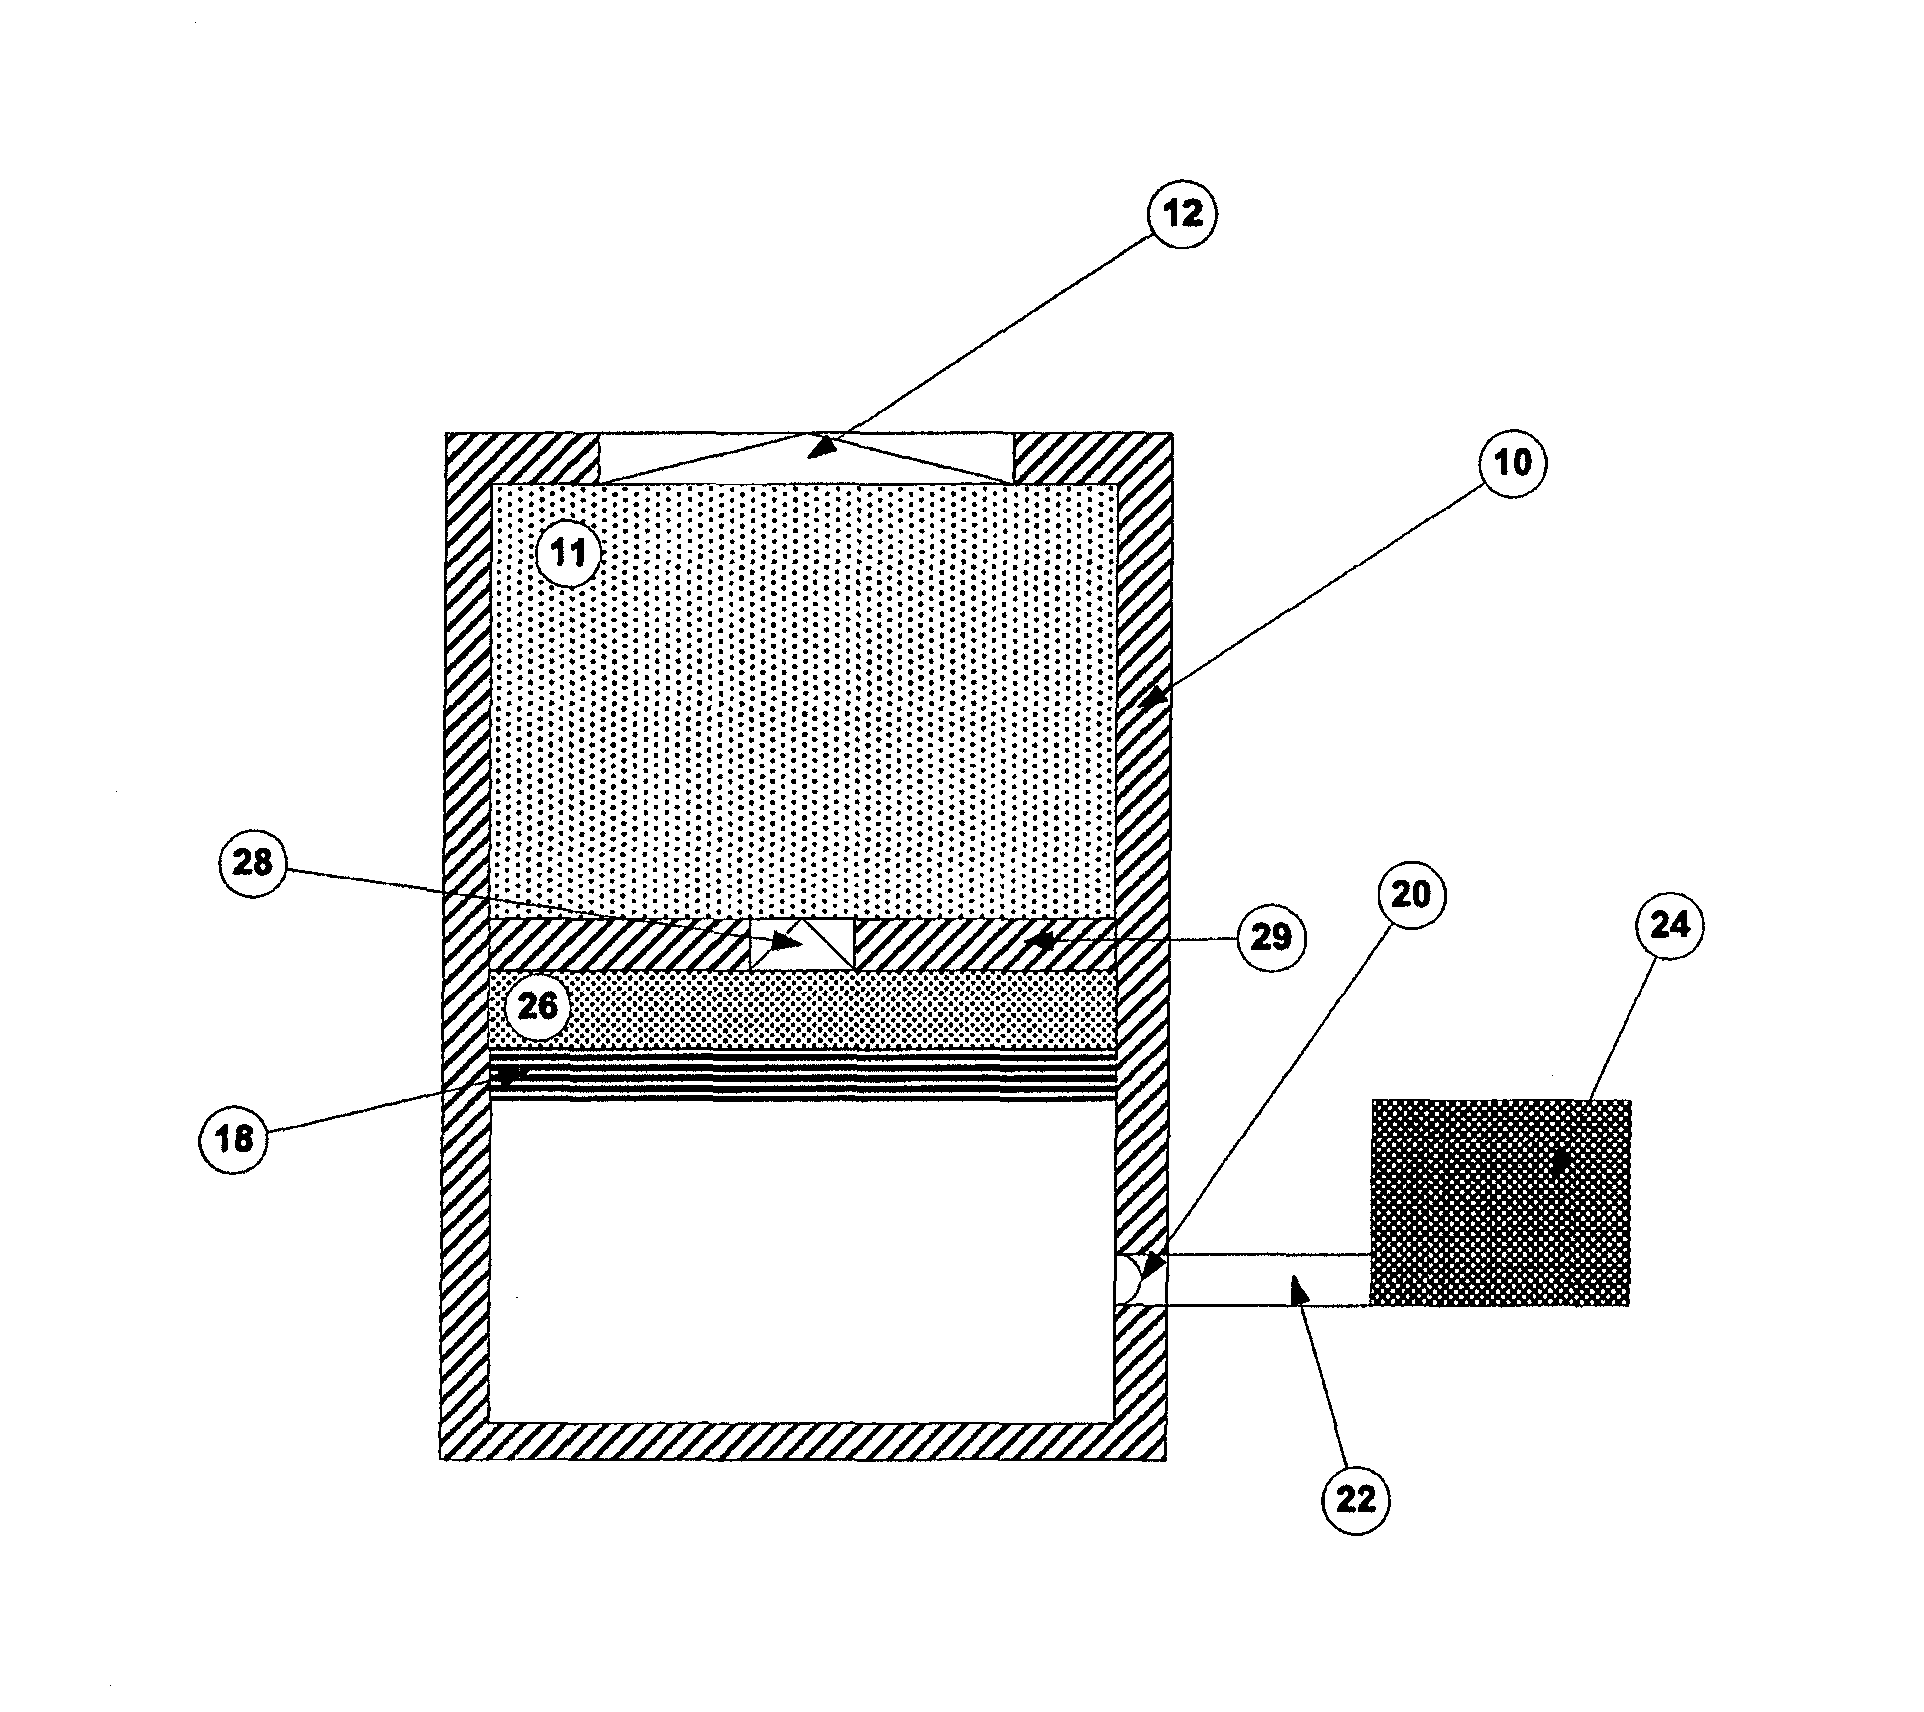 Apparatus and method for distributing irritants or warfare agents